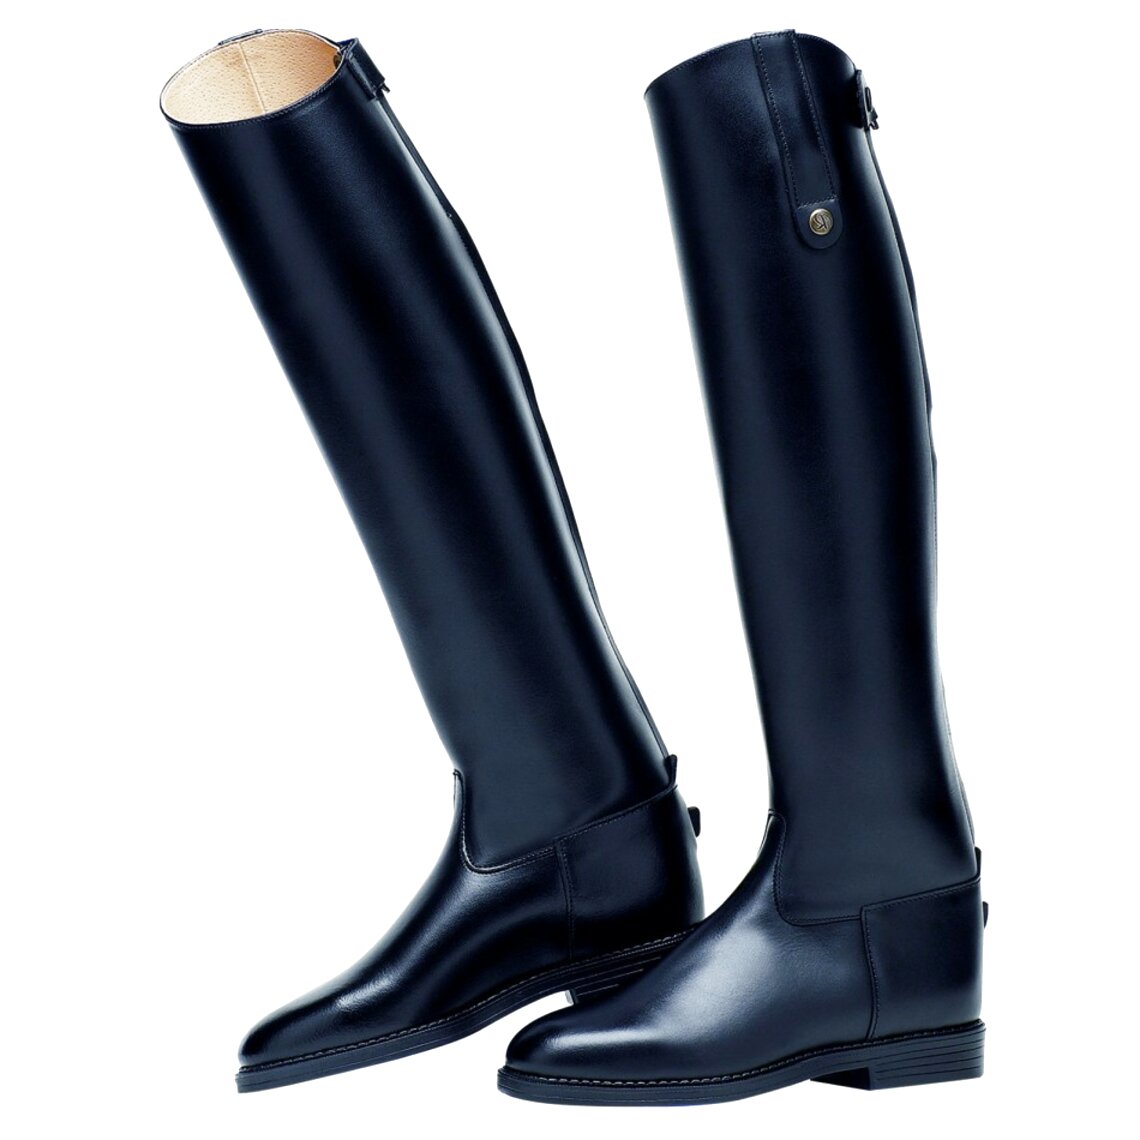 Rectiligne Riding Boots for sale in UK | 16 used Rectiligne Riding Boots